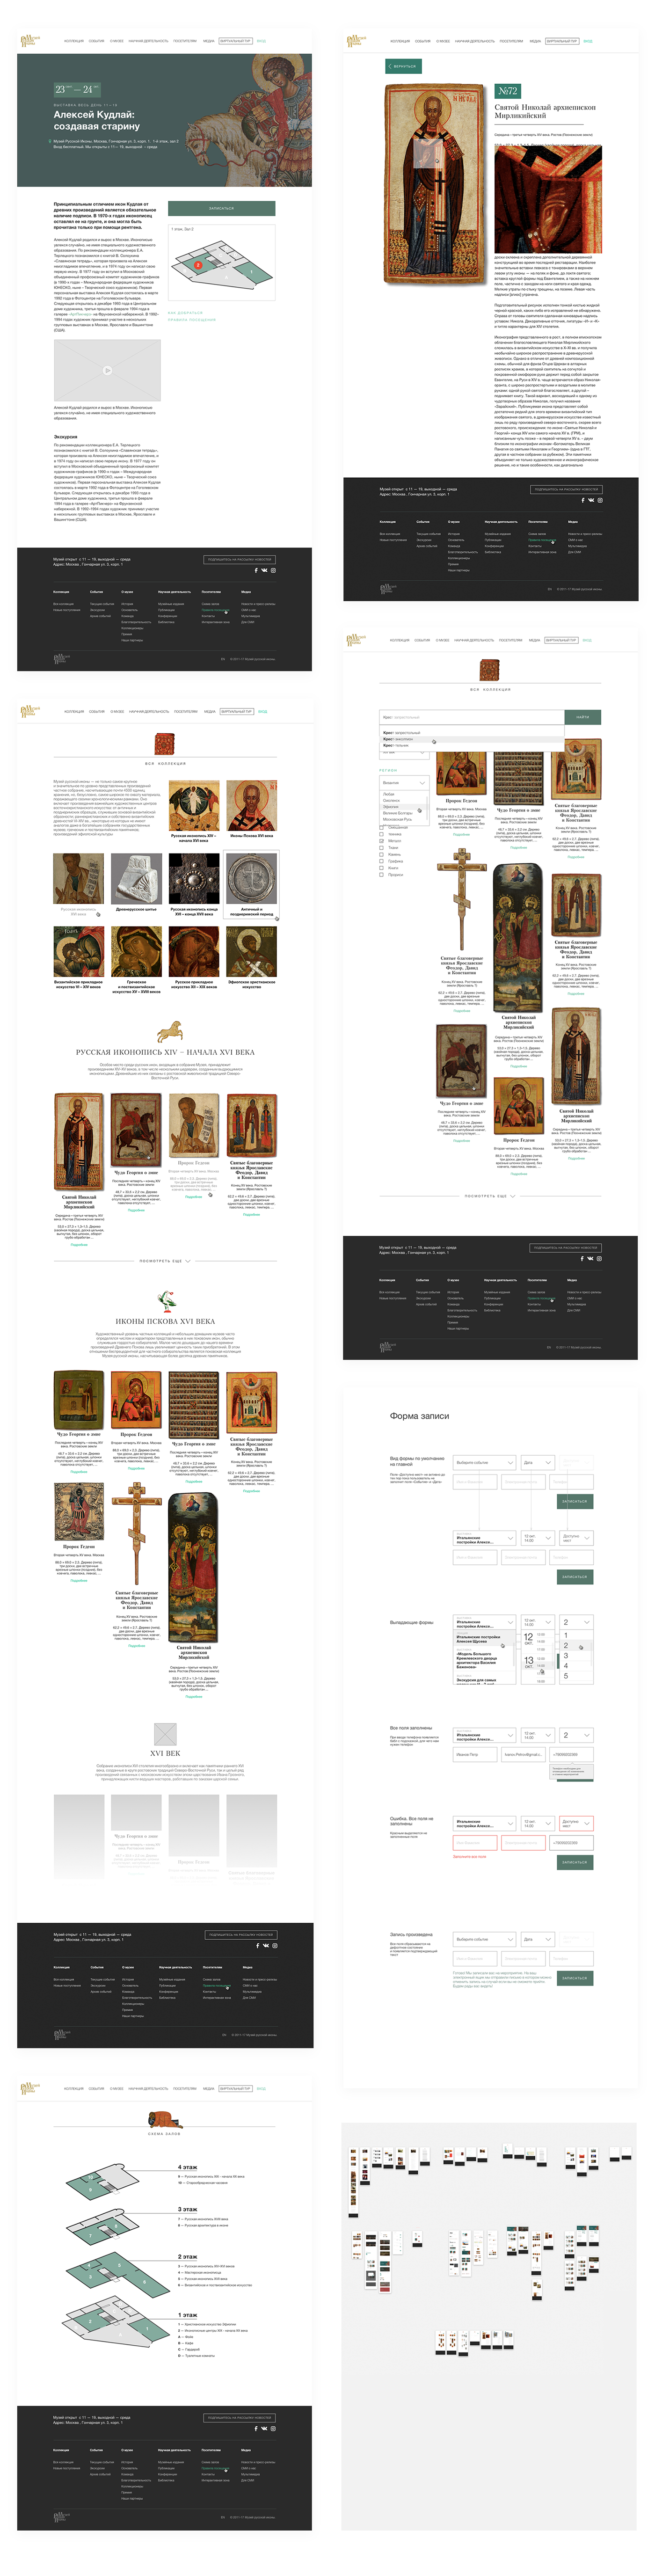 museum russian icons site service Web page